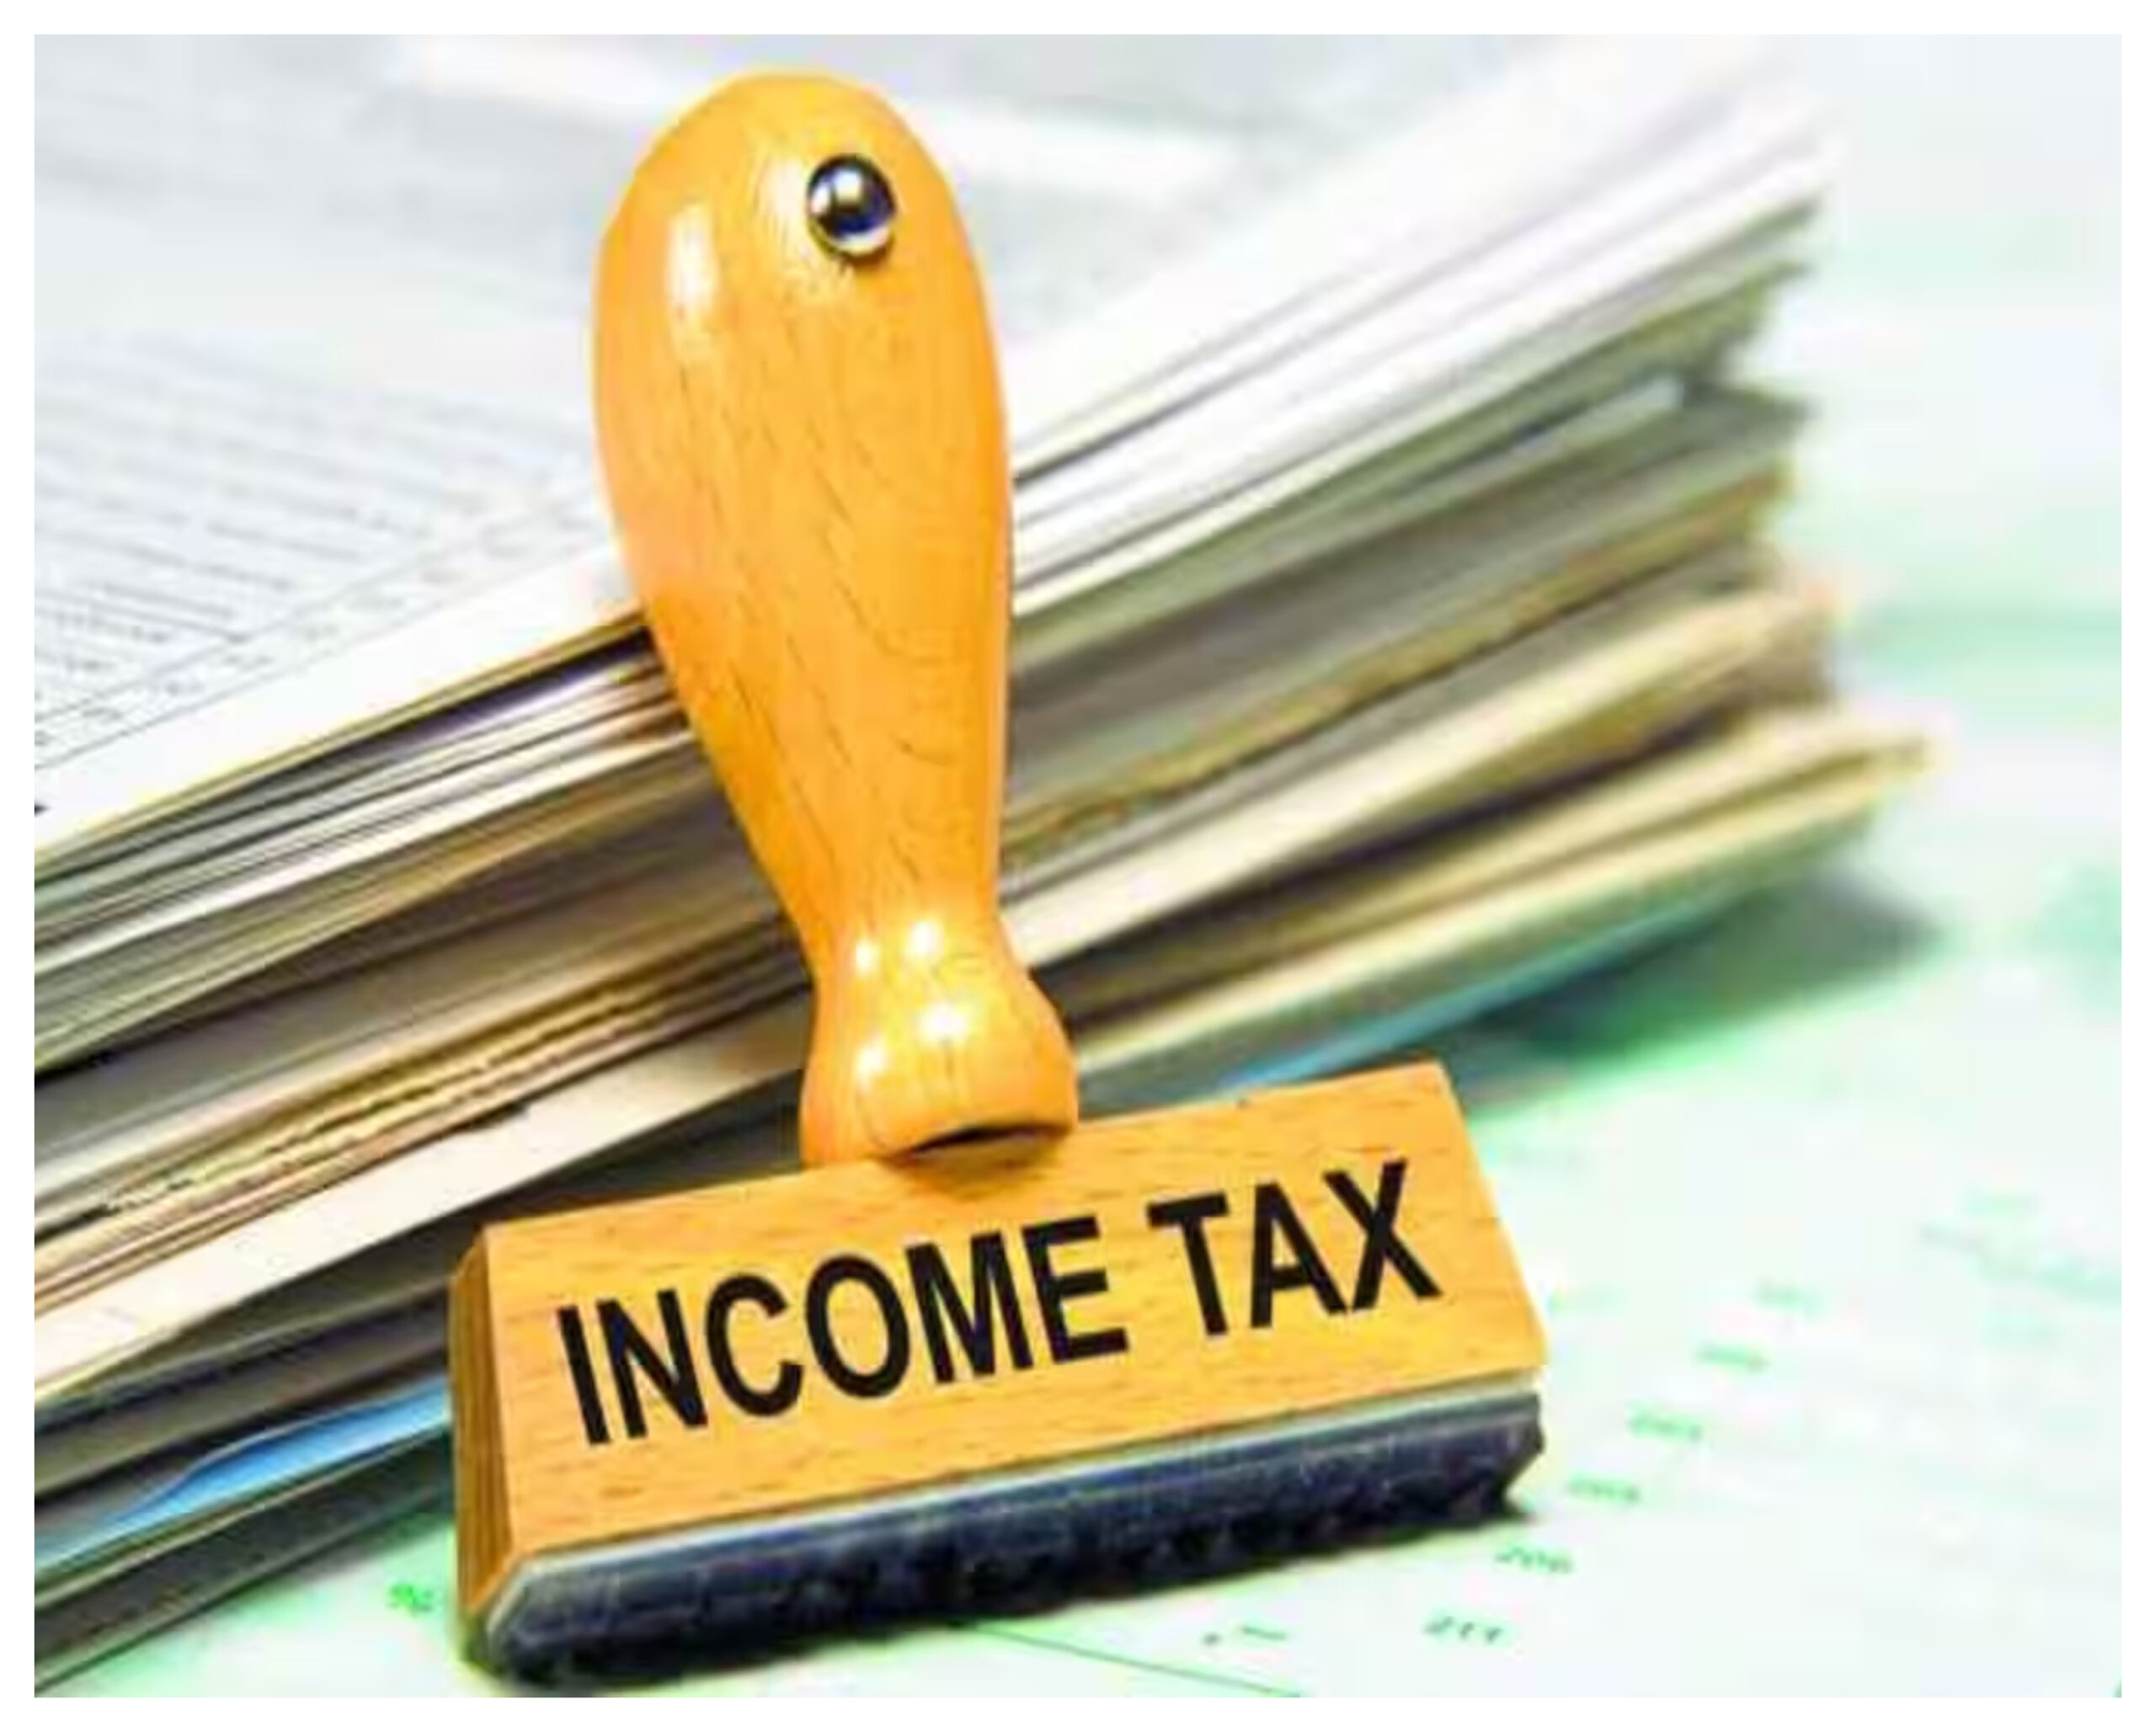 Income Tax: Political parties also have to pay tax, know what are the rules?, Income Tax, why do people pay taxes?, Where does the government use taxes? Political news in hindi, totaltv news in hindi